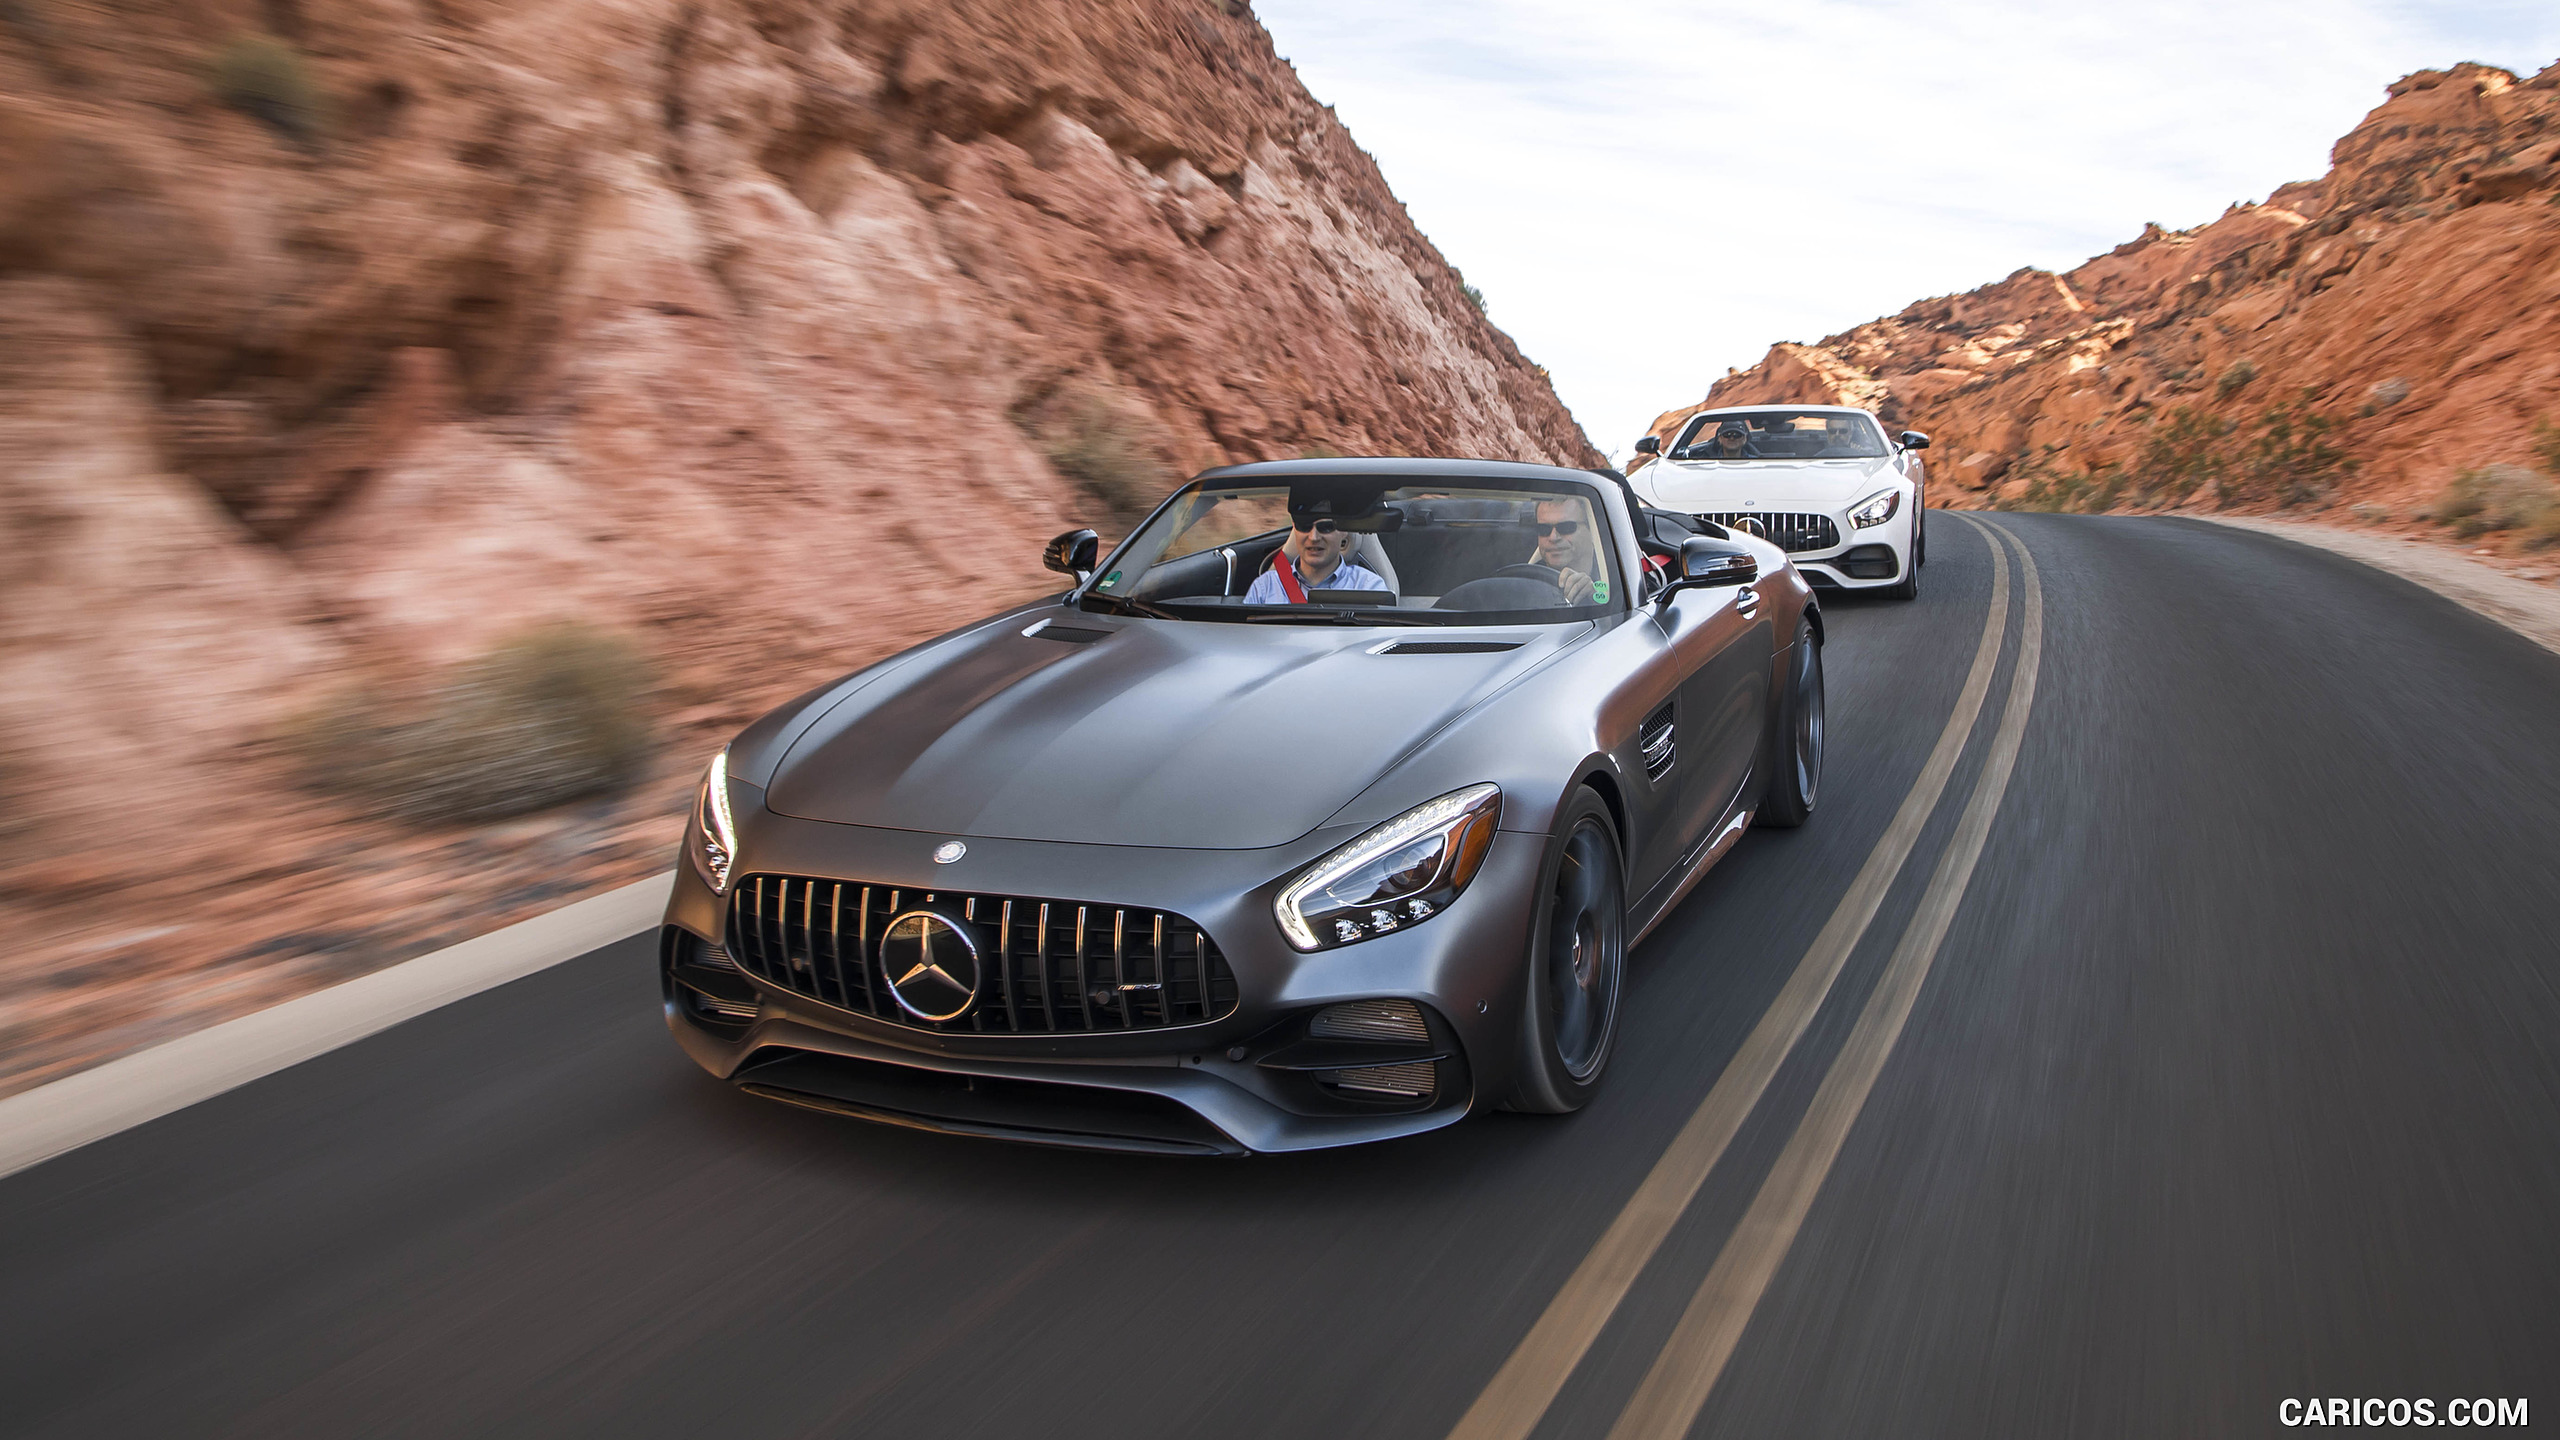 2018 Mercedes-AMG GT C Roadster - Front Three-Quarter, #47 of 350